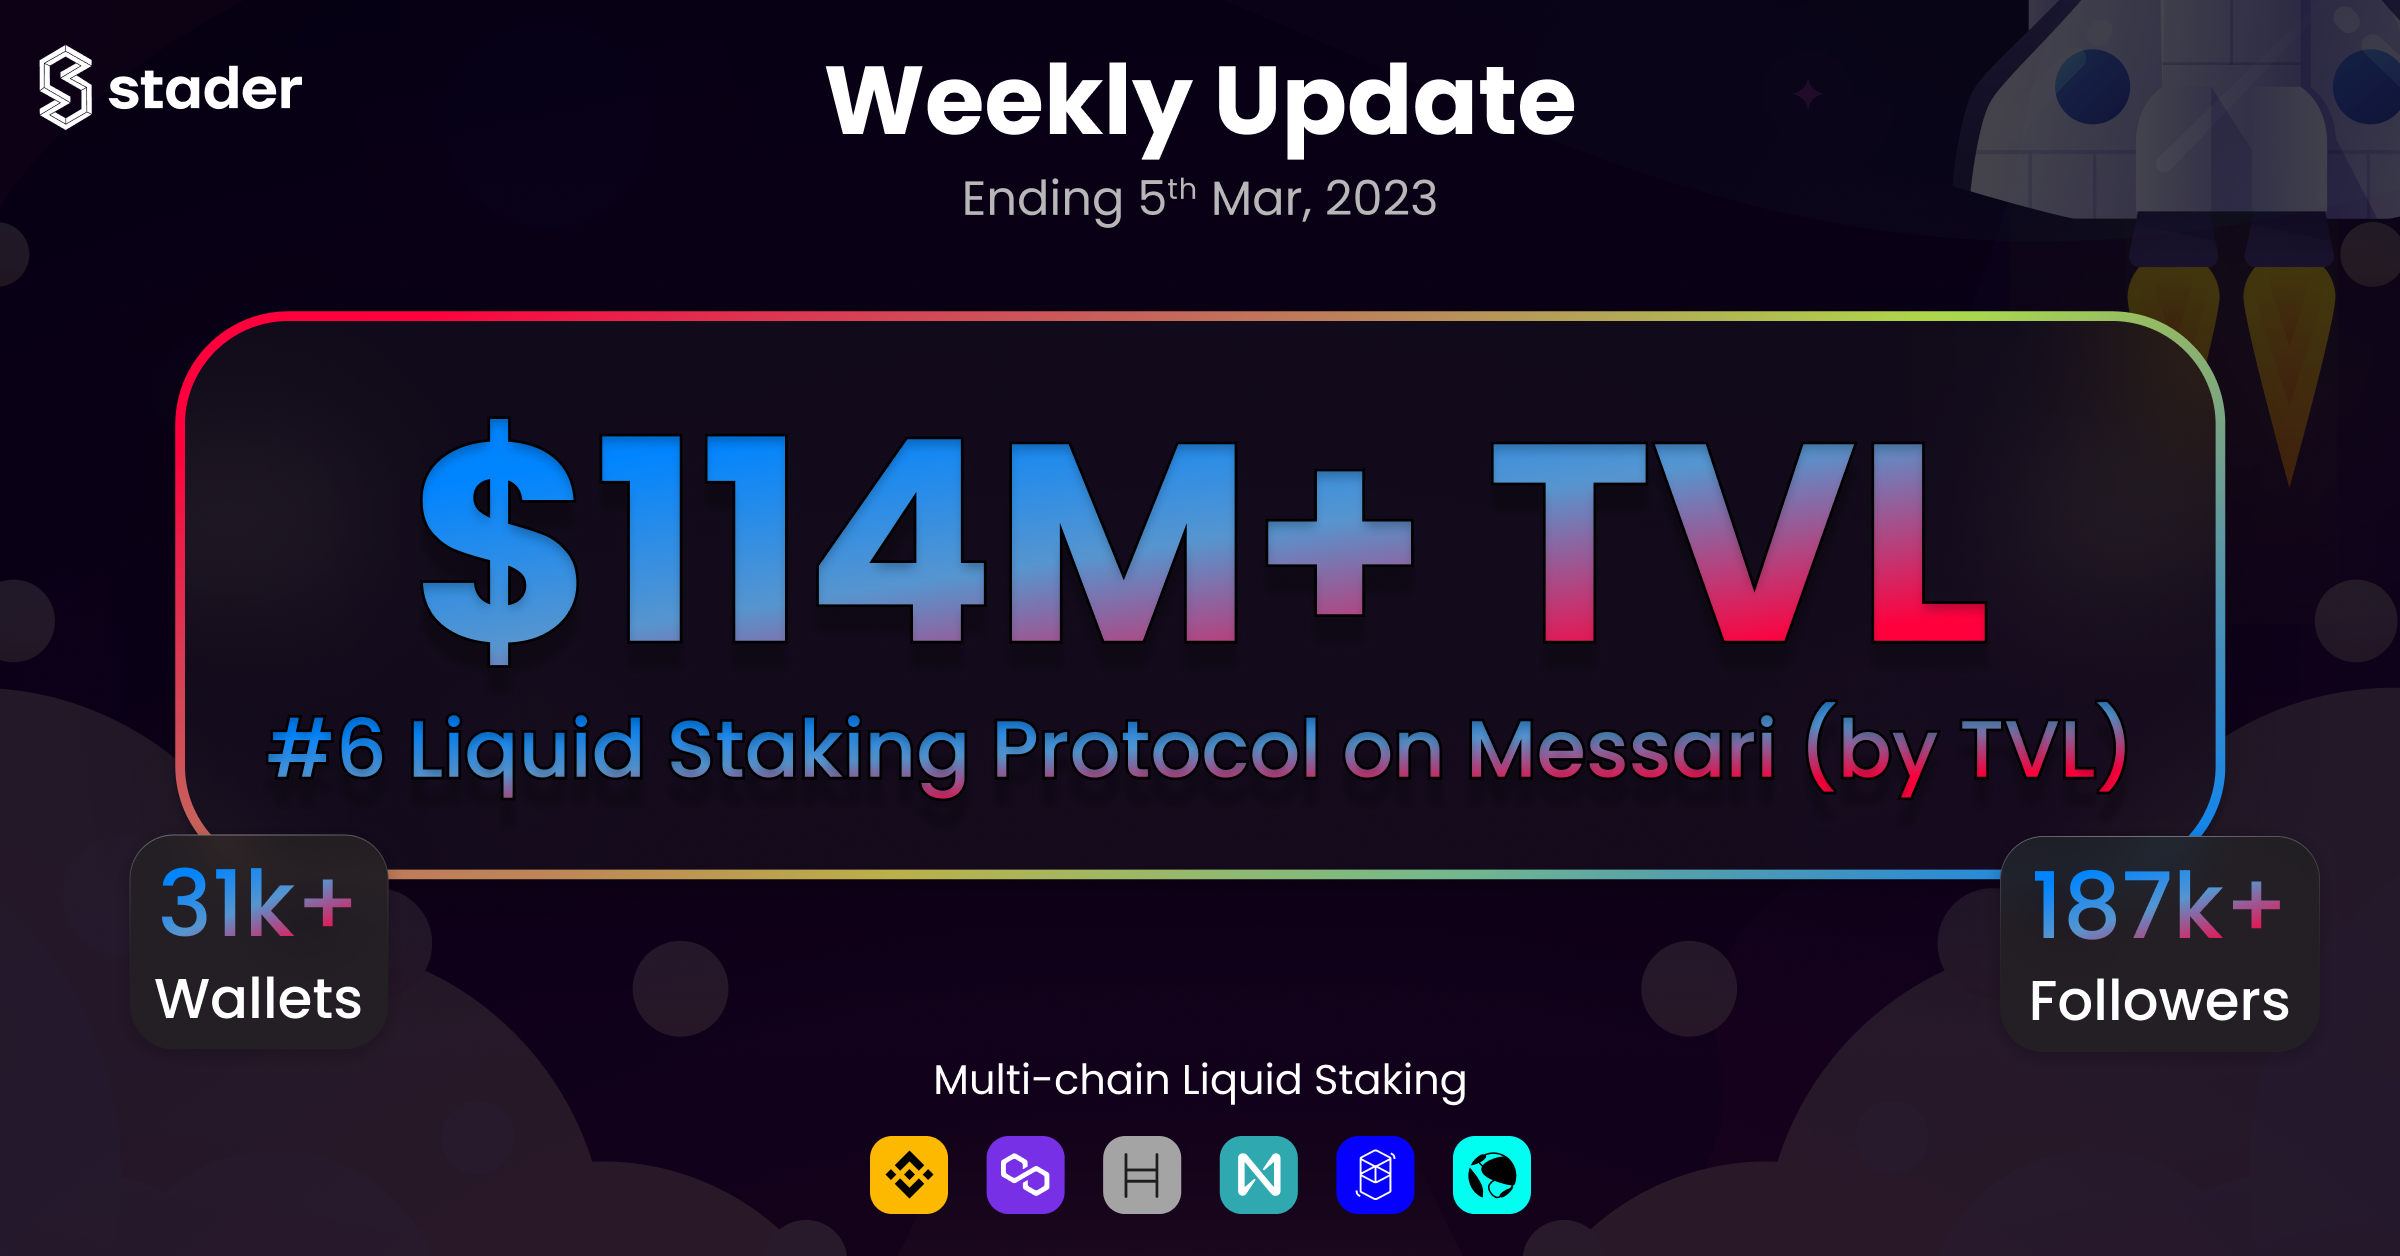 Stader’s Weekly Update (5th March, 2023)